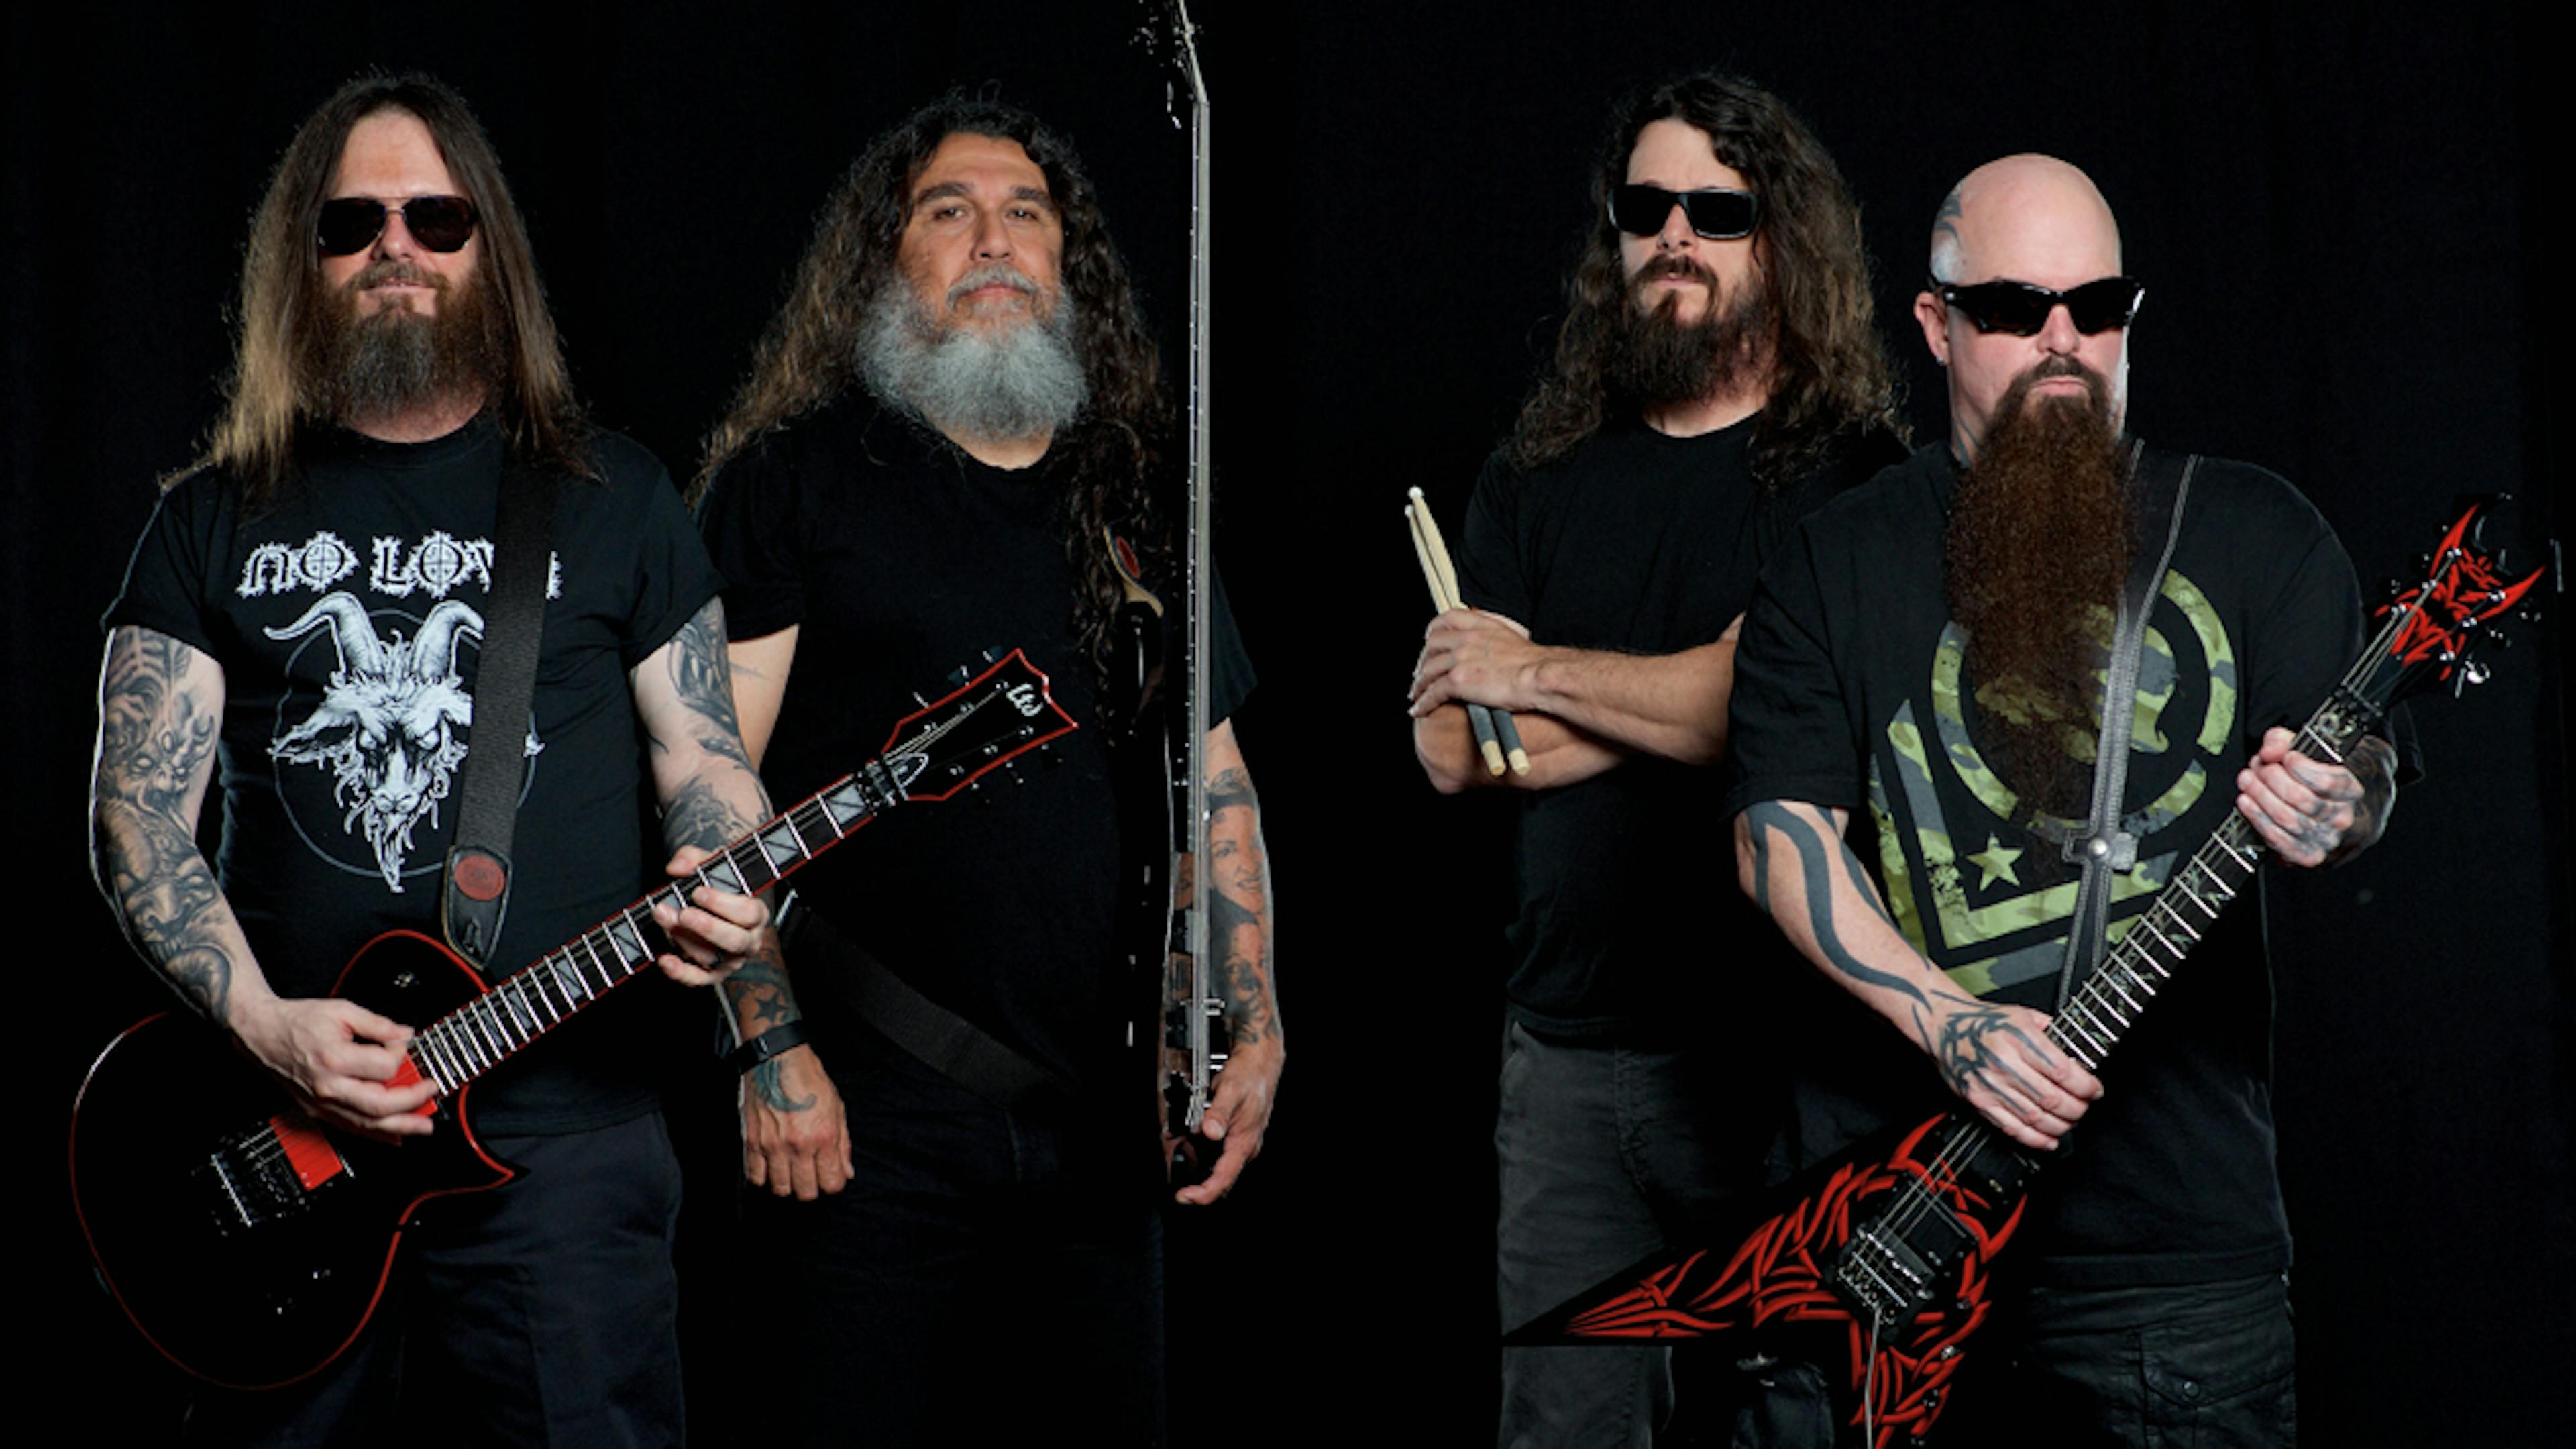 Slayer Announce North American Tour Dates With Lamb Of God, Amon Amarth, And Cannibal Corpse